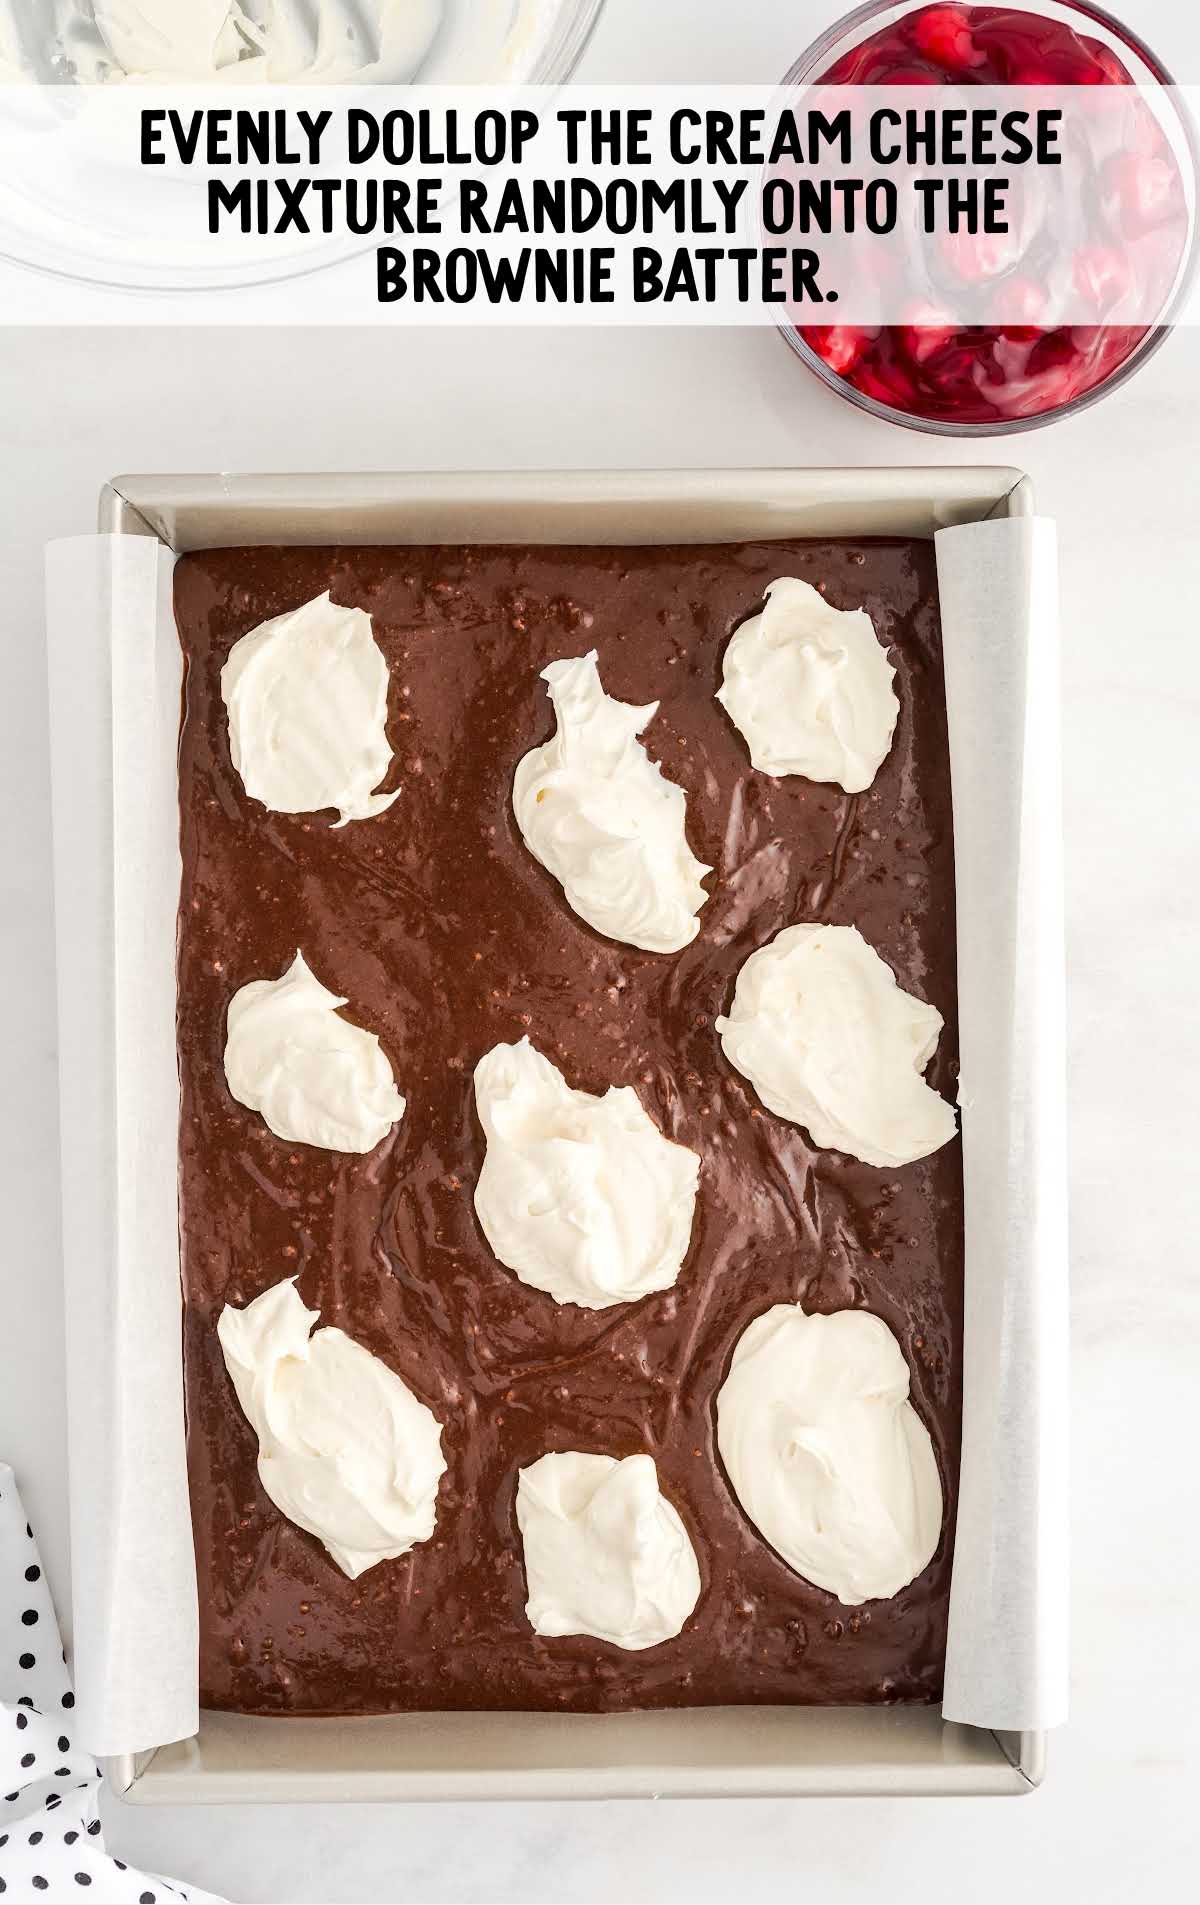 scoops of cream cheese mixture placed on top of the brownie mixture